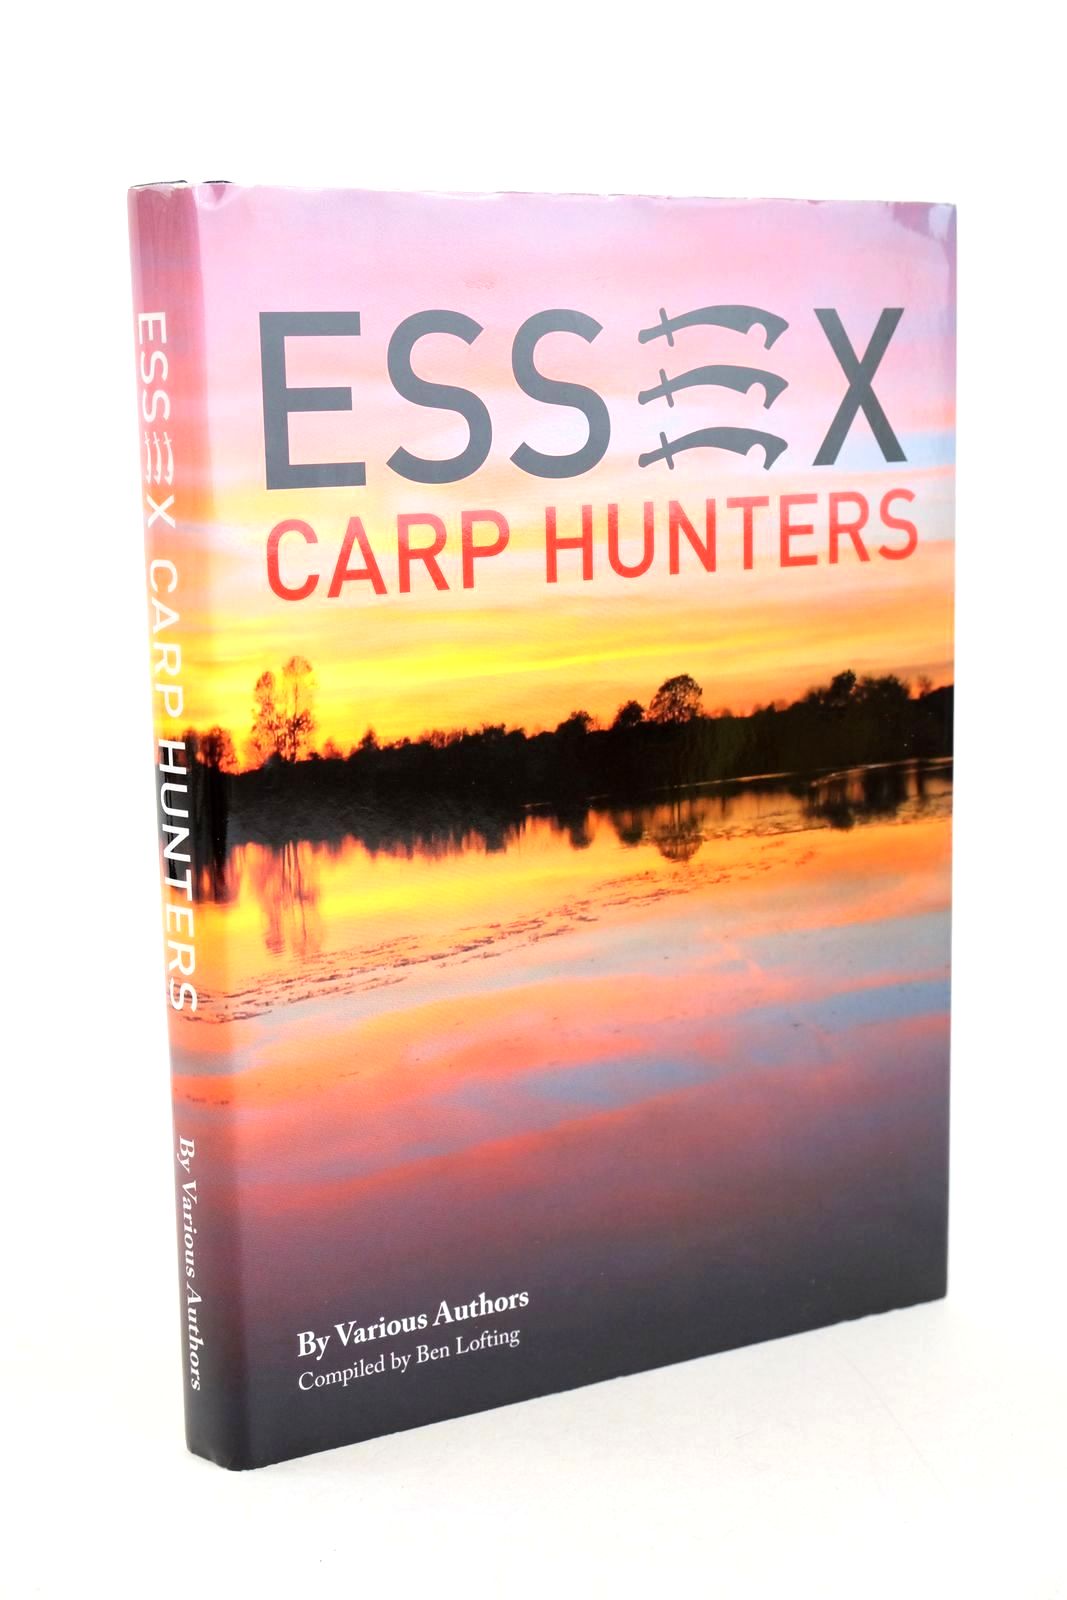 Photo of ESSEX CARP HUNTERS BY VARIOUS AUTHORS written by Lofting, Ben published by Calm Productions (STOCK CODE: 1327563)  for sale by Stella & Rose's Books